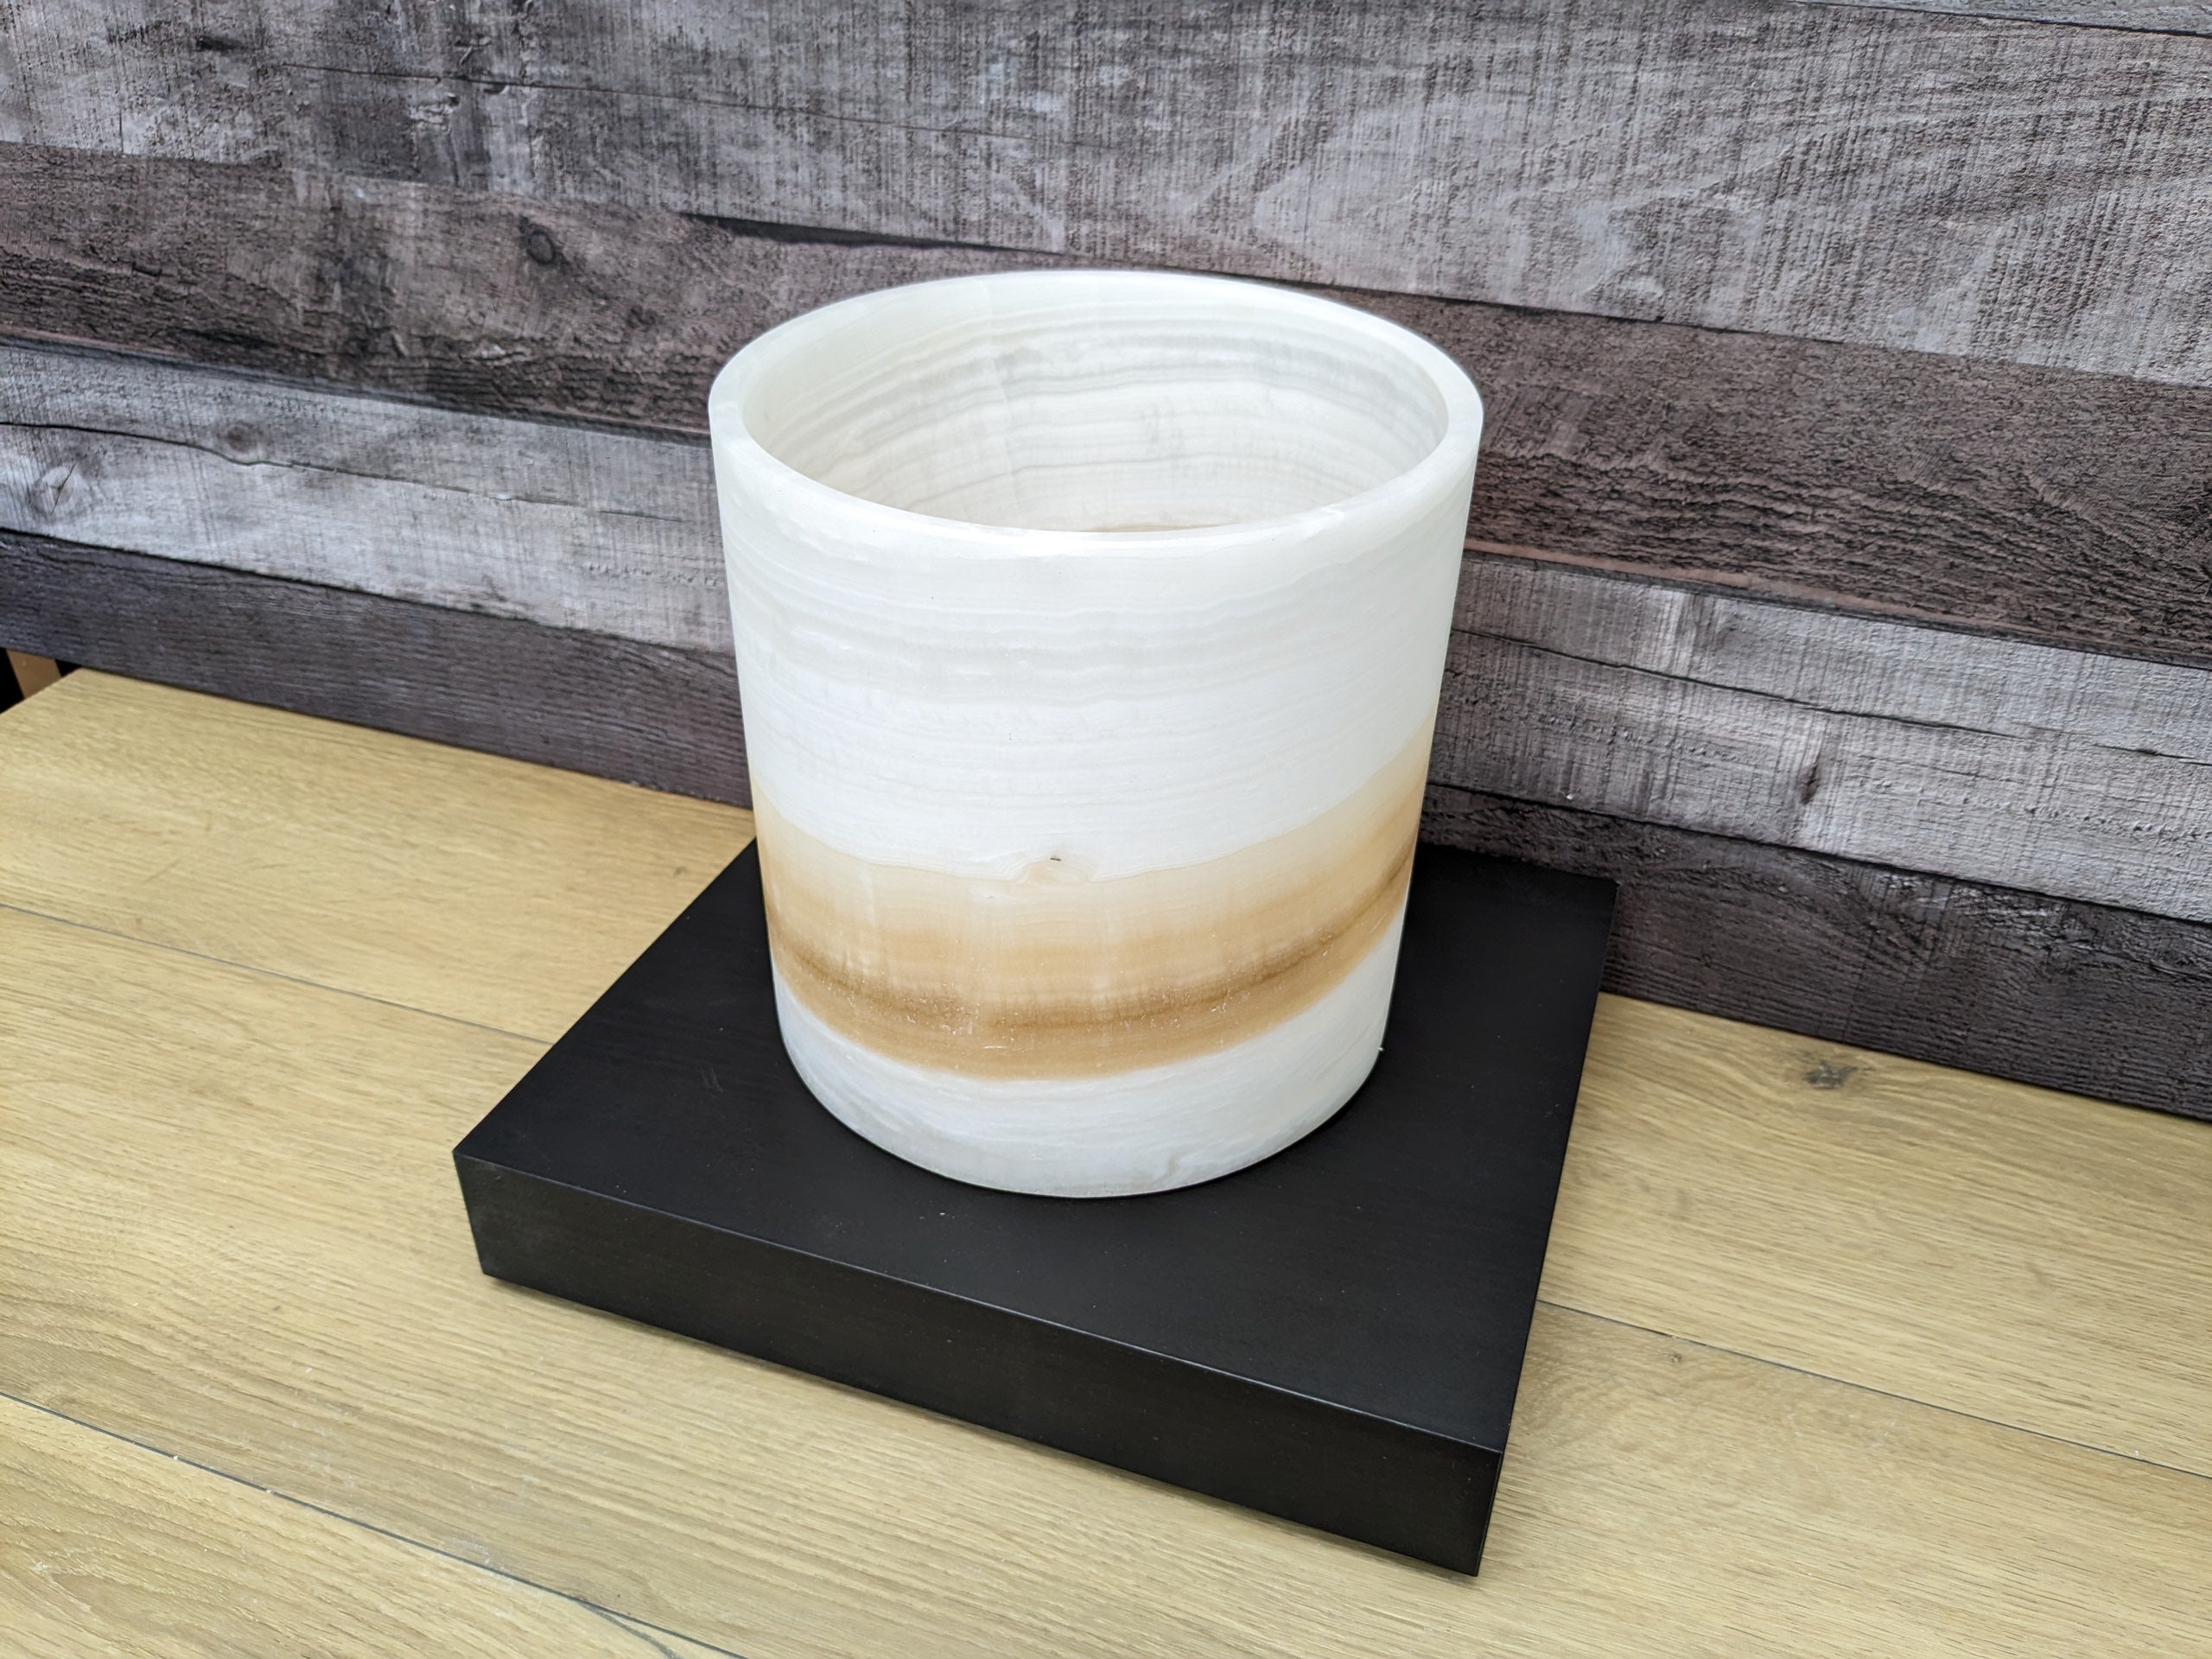 White Onyx Stone Trash Receptacle with Brown Stripe that Swirls Up. Handmade in Mexico. Ships from the USA. Buy now at www.felipeandgrace.com.